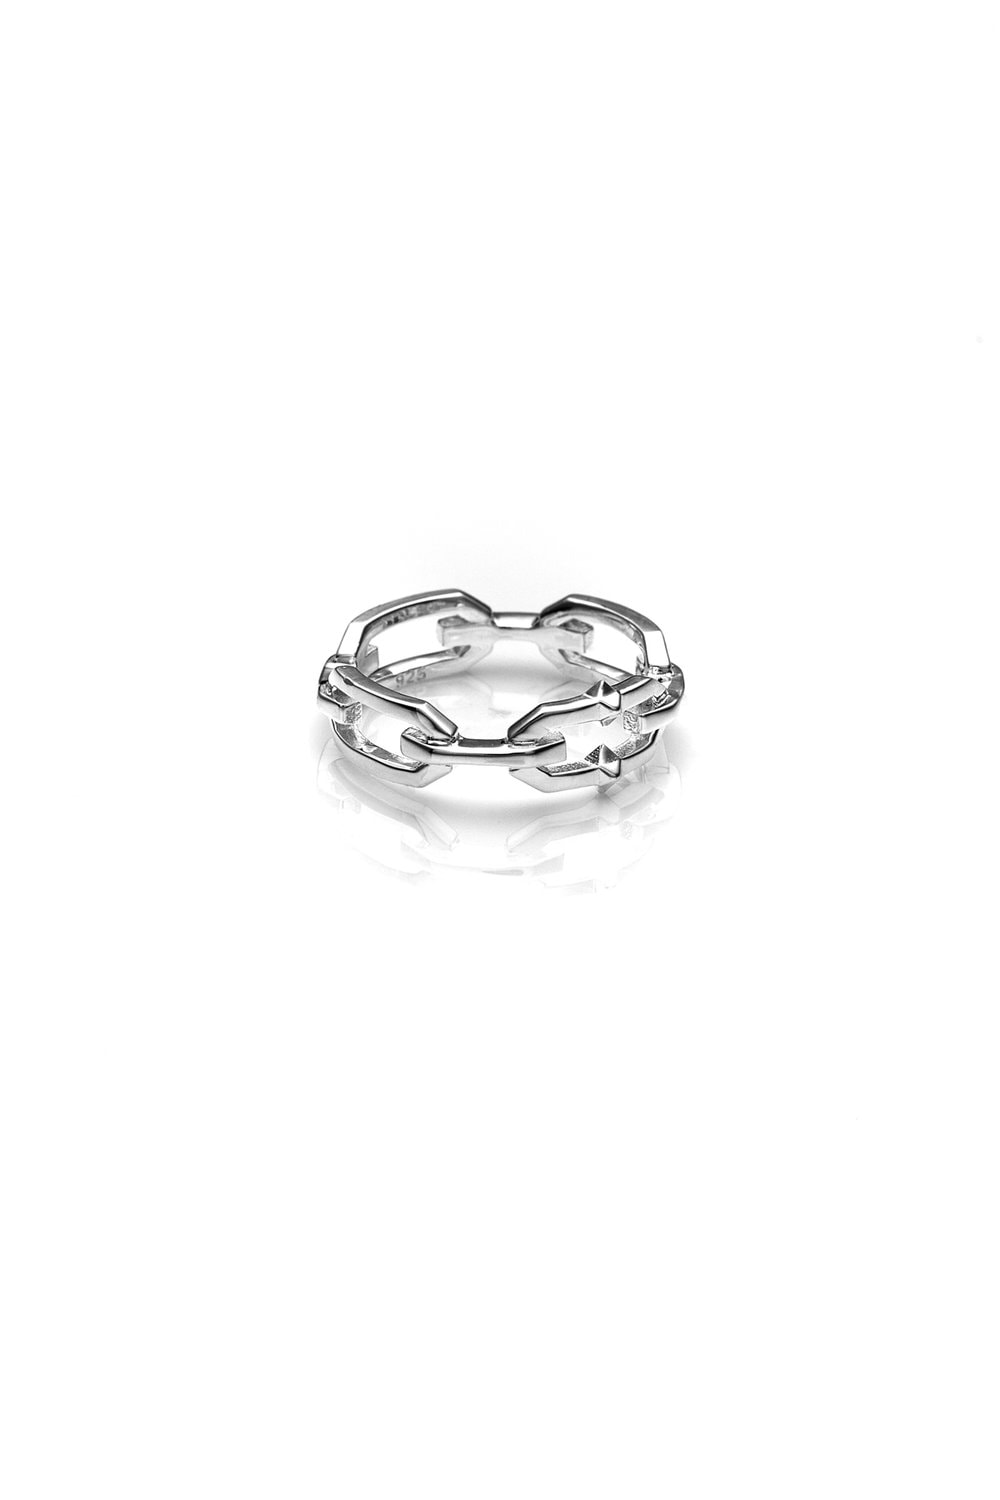 Helsing Chain Ring - Knights The Jewellers Online Jewellery Store